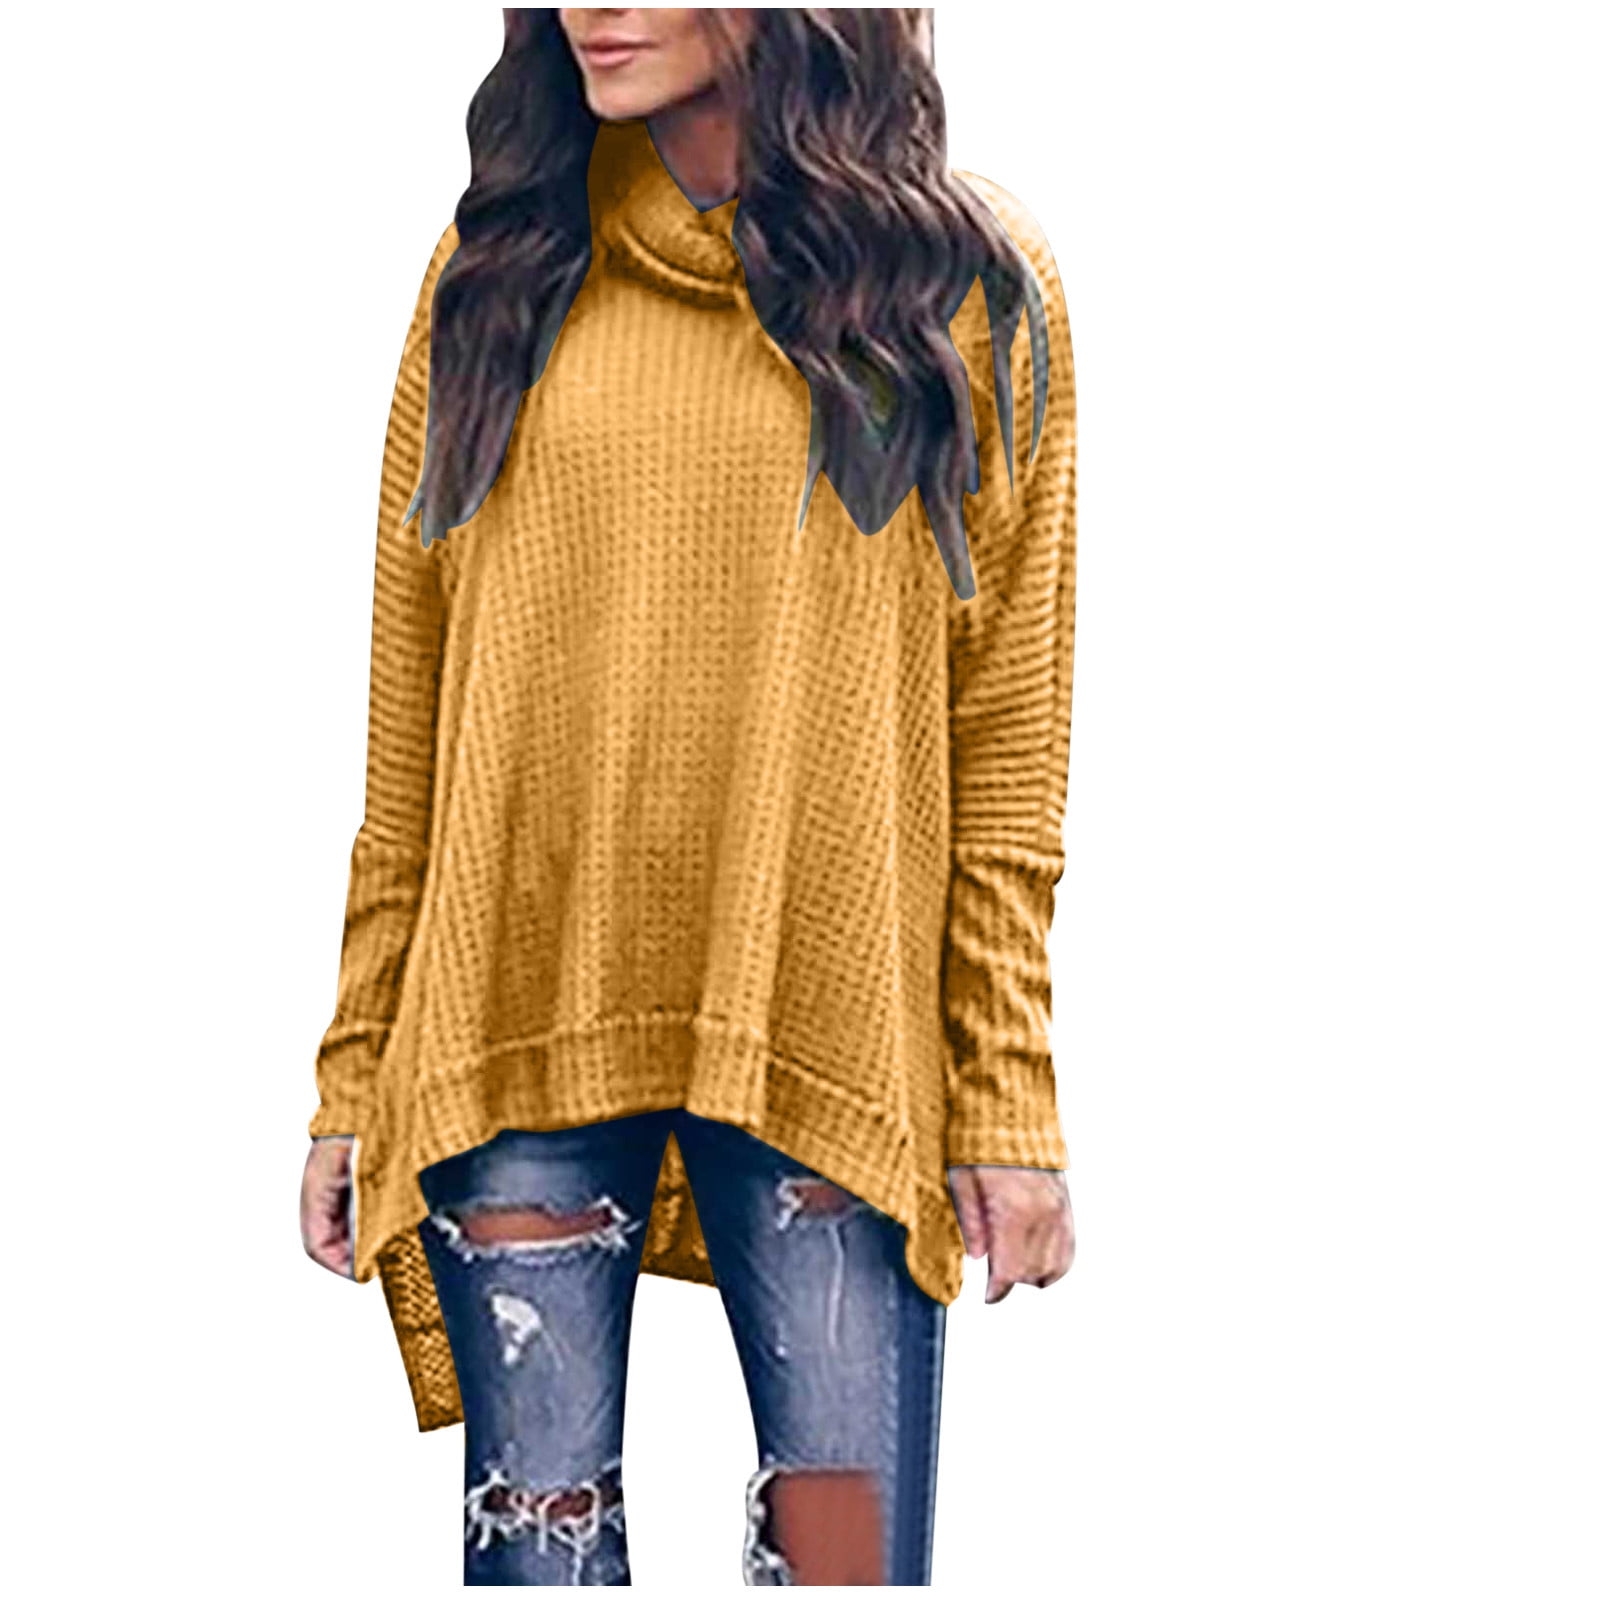 Women Crew Neck Long Sleeve Pullover Top Solid Color Hem Ripped,Overstock  Items Clearance All,Under 5 Dollar,Coupons for Prime Members,pallets for  Sale Liquidation